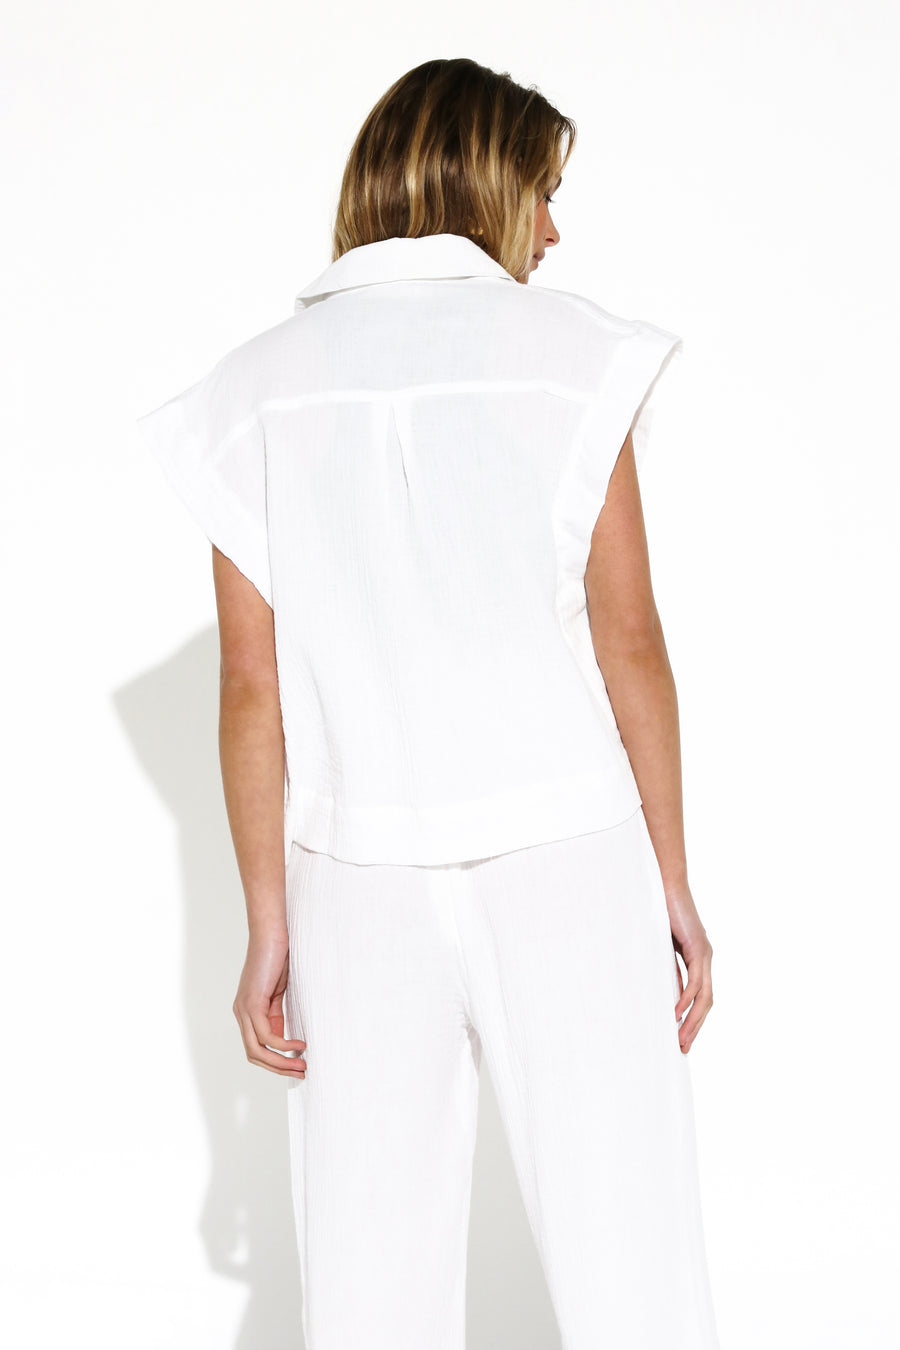 Marlo Top - White | Madison The Label - Clearance